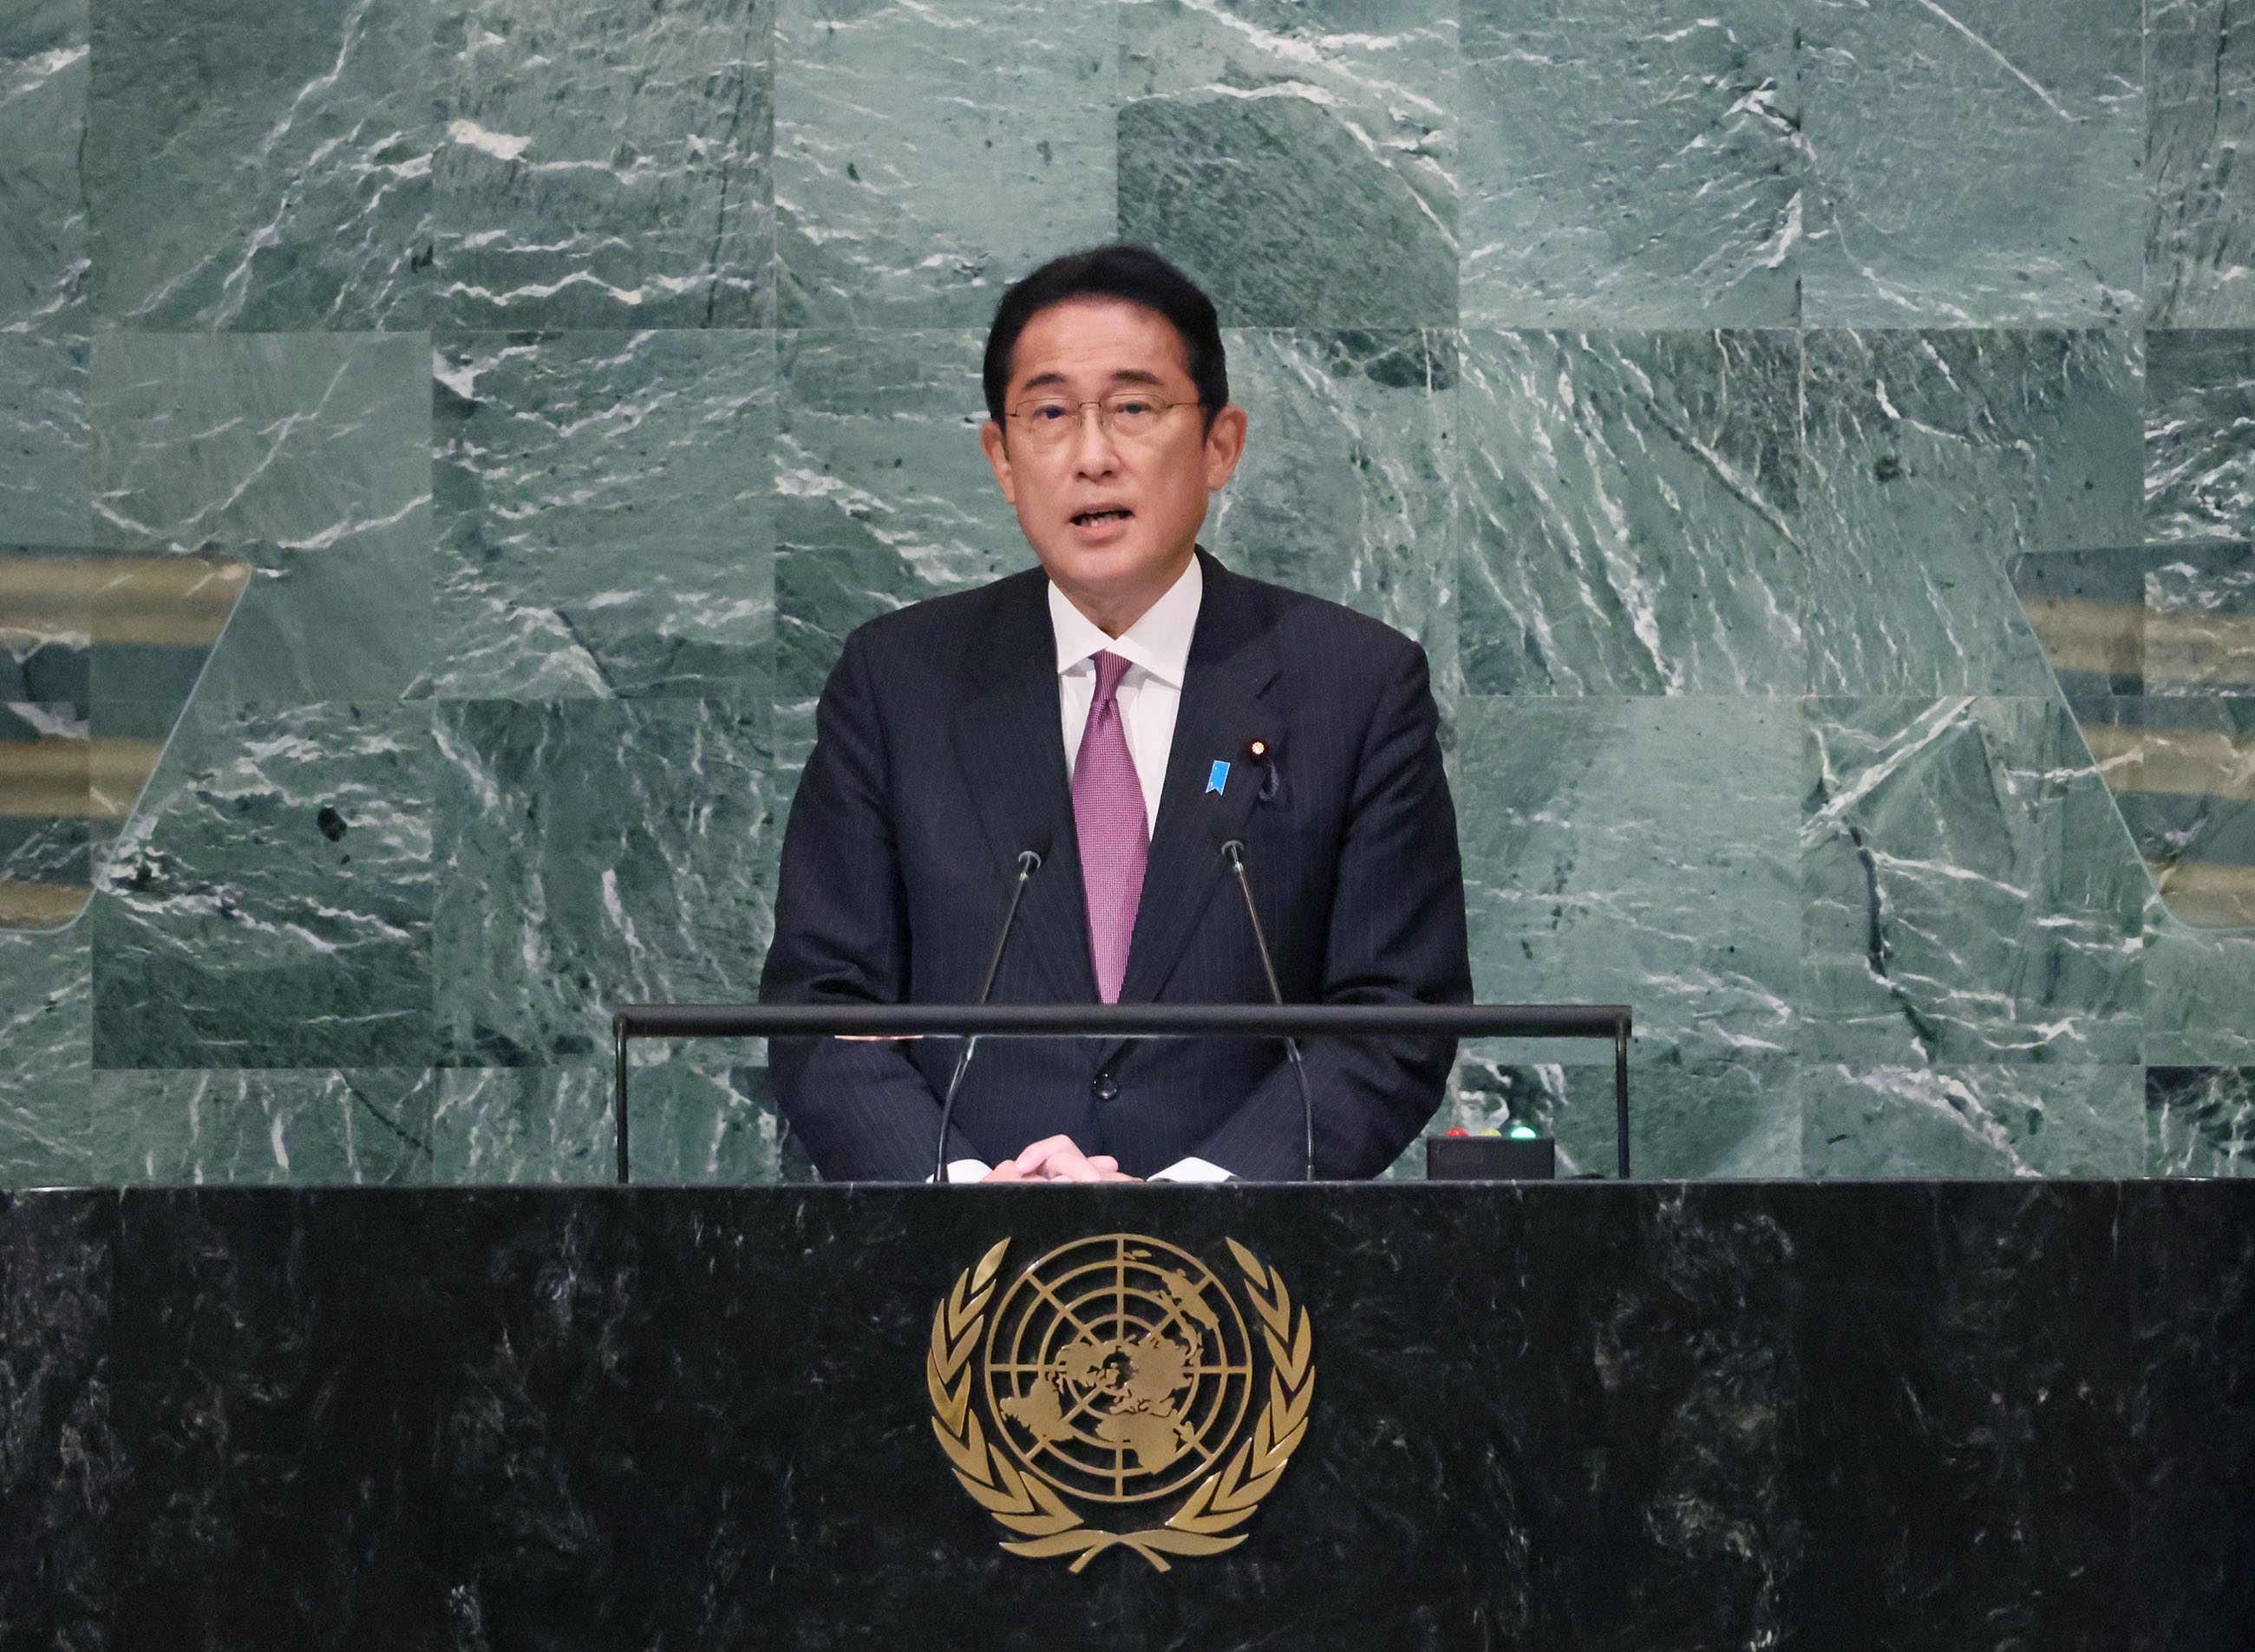 Photograph of the Prime Minister delivering an address at the United Nations General Assembly (11)